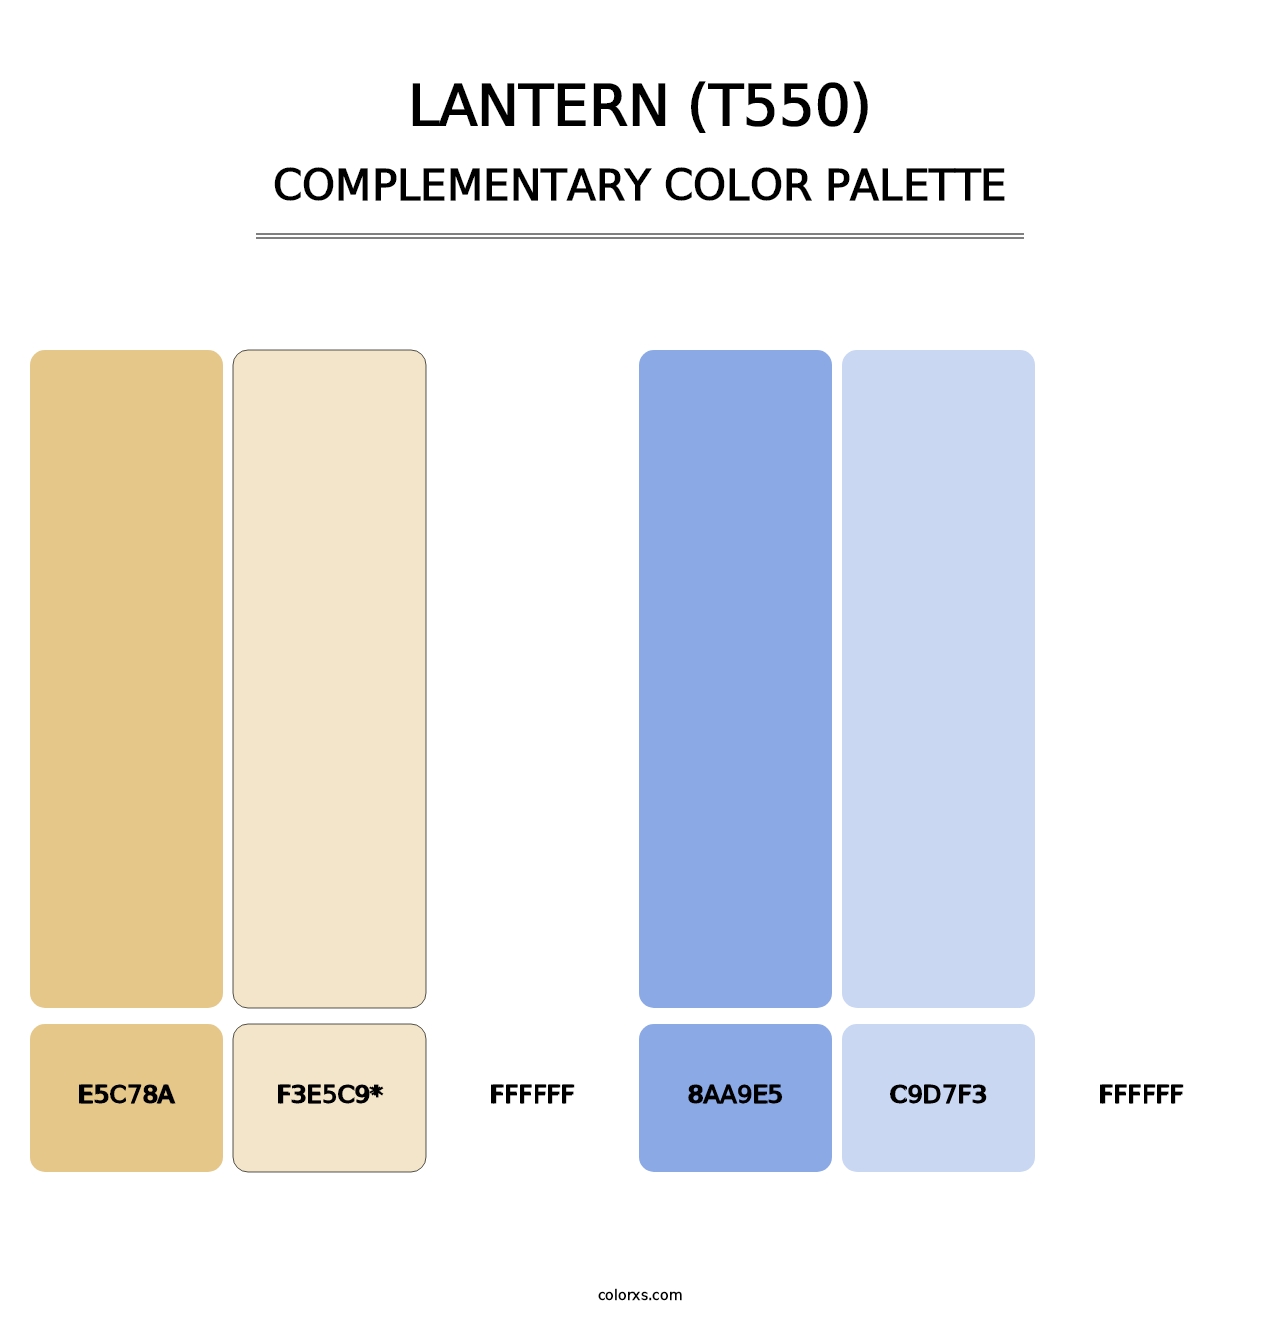 Lantern (T550) - Complementary Color Palette